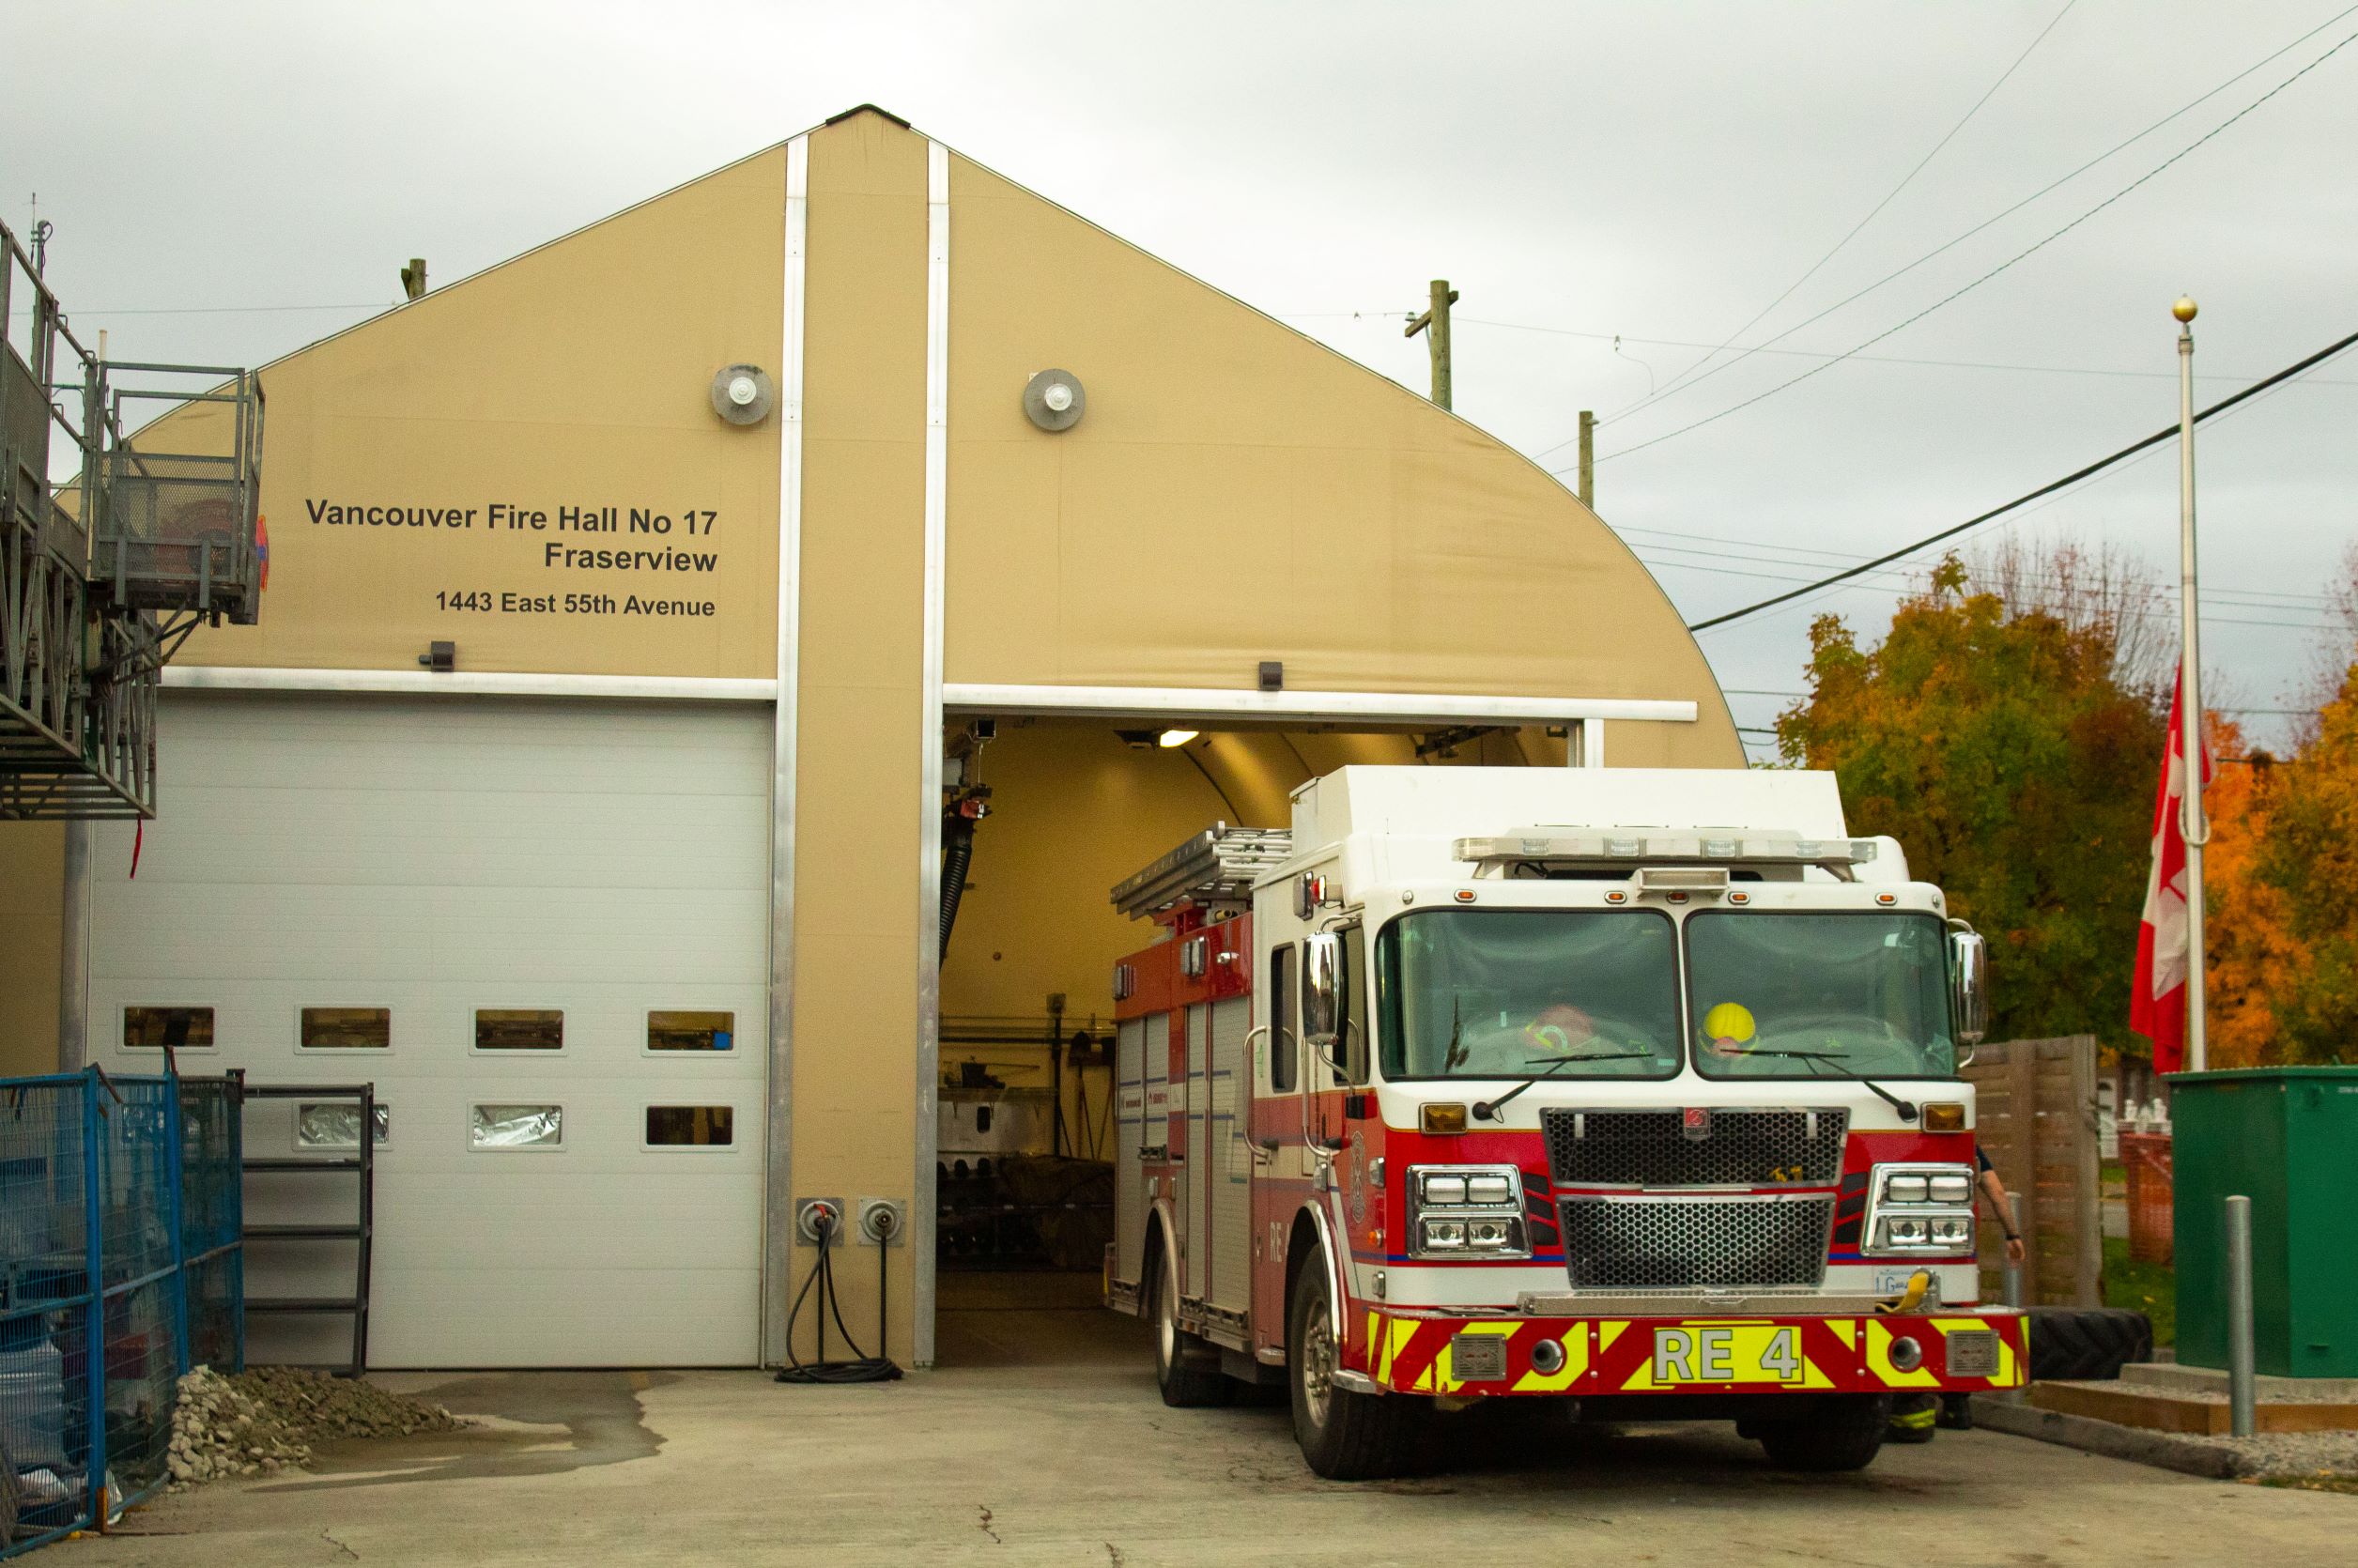 A firehall with a fire truck